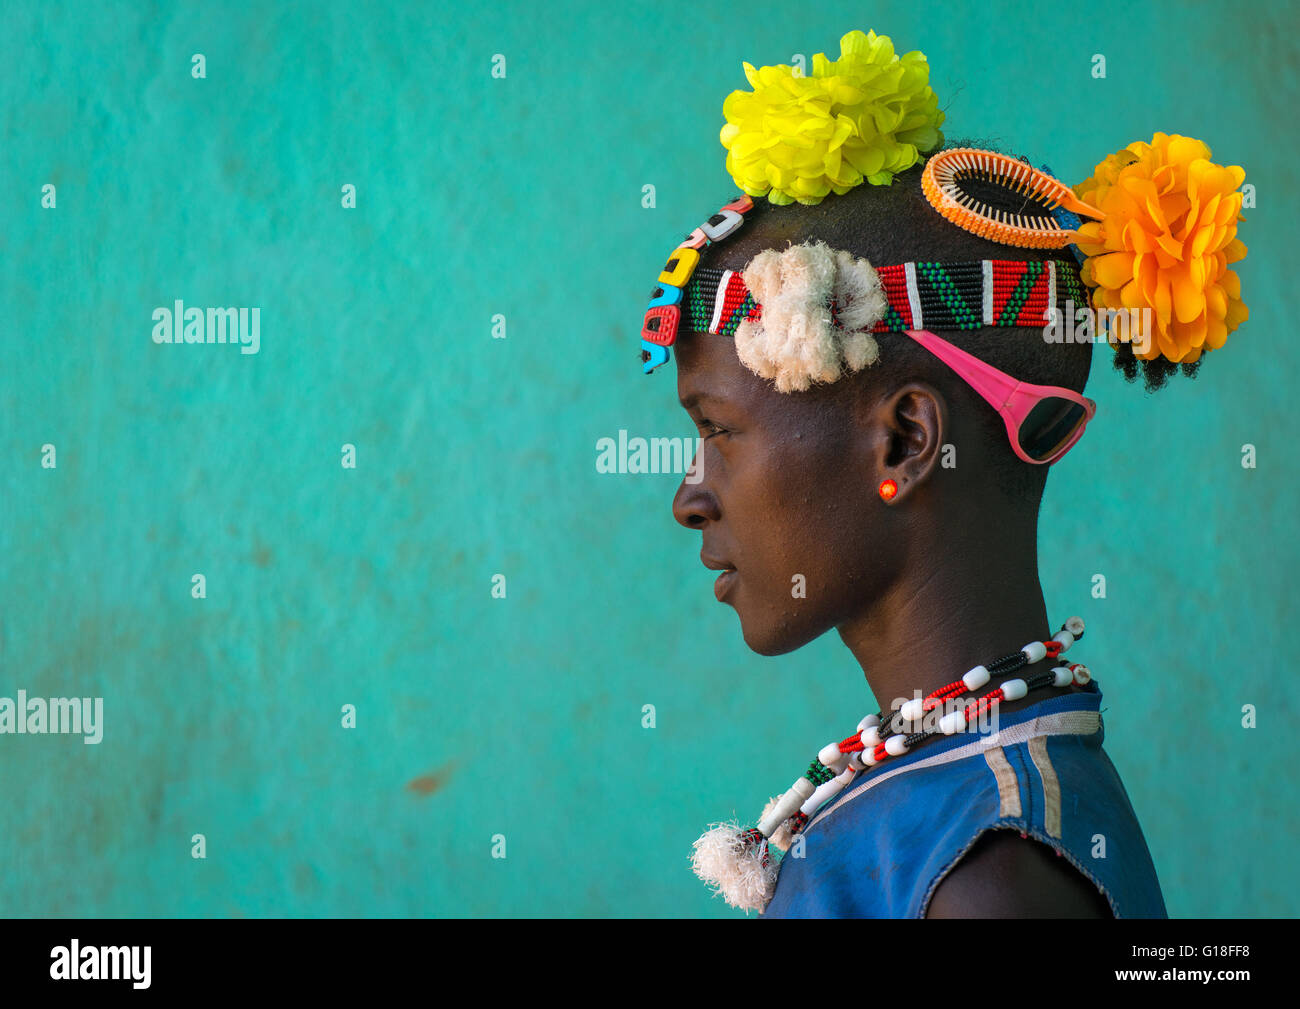 Profile of a bana tribe man with plastic flowers in the hair, Omo valley, Key afer, Ethiopia Stock Photo